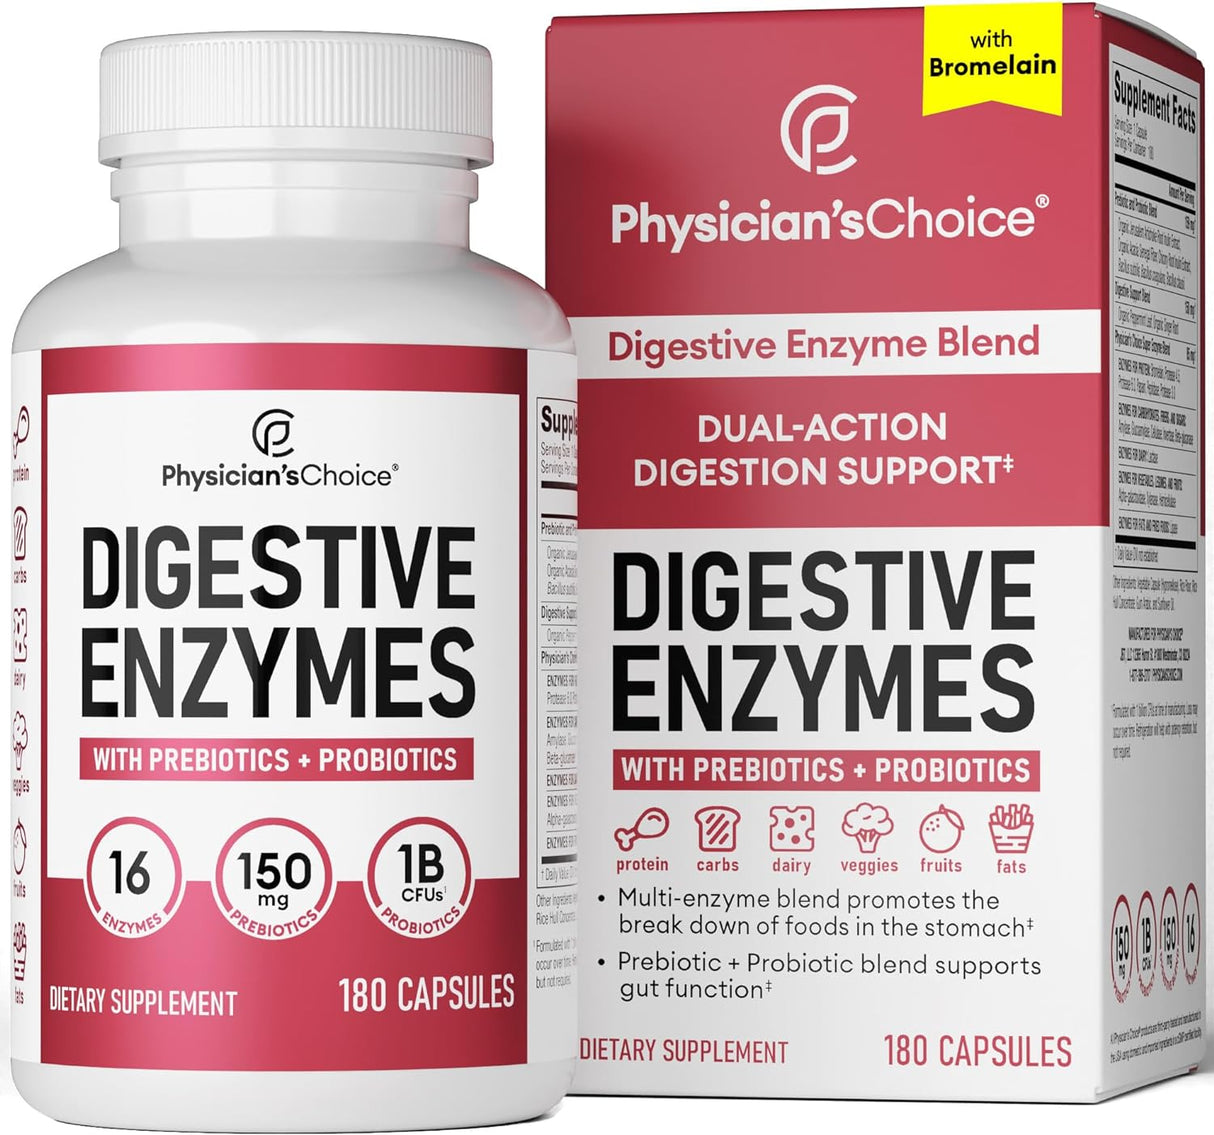 Physician's CHOICE Digestive Enzymes